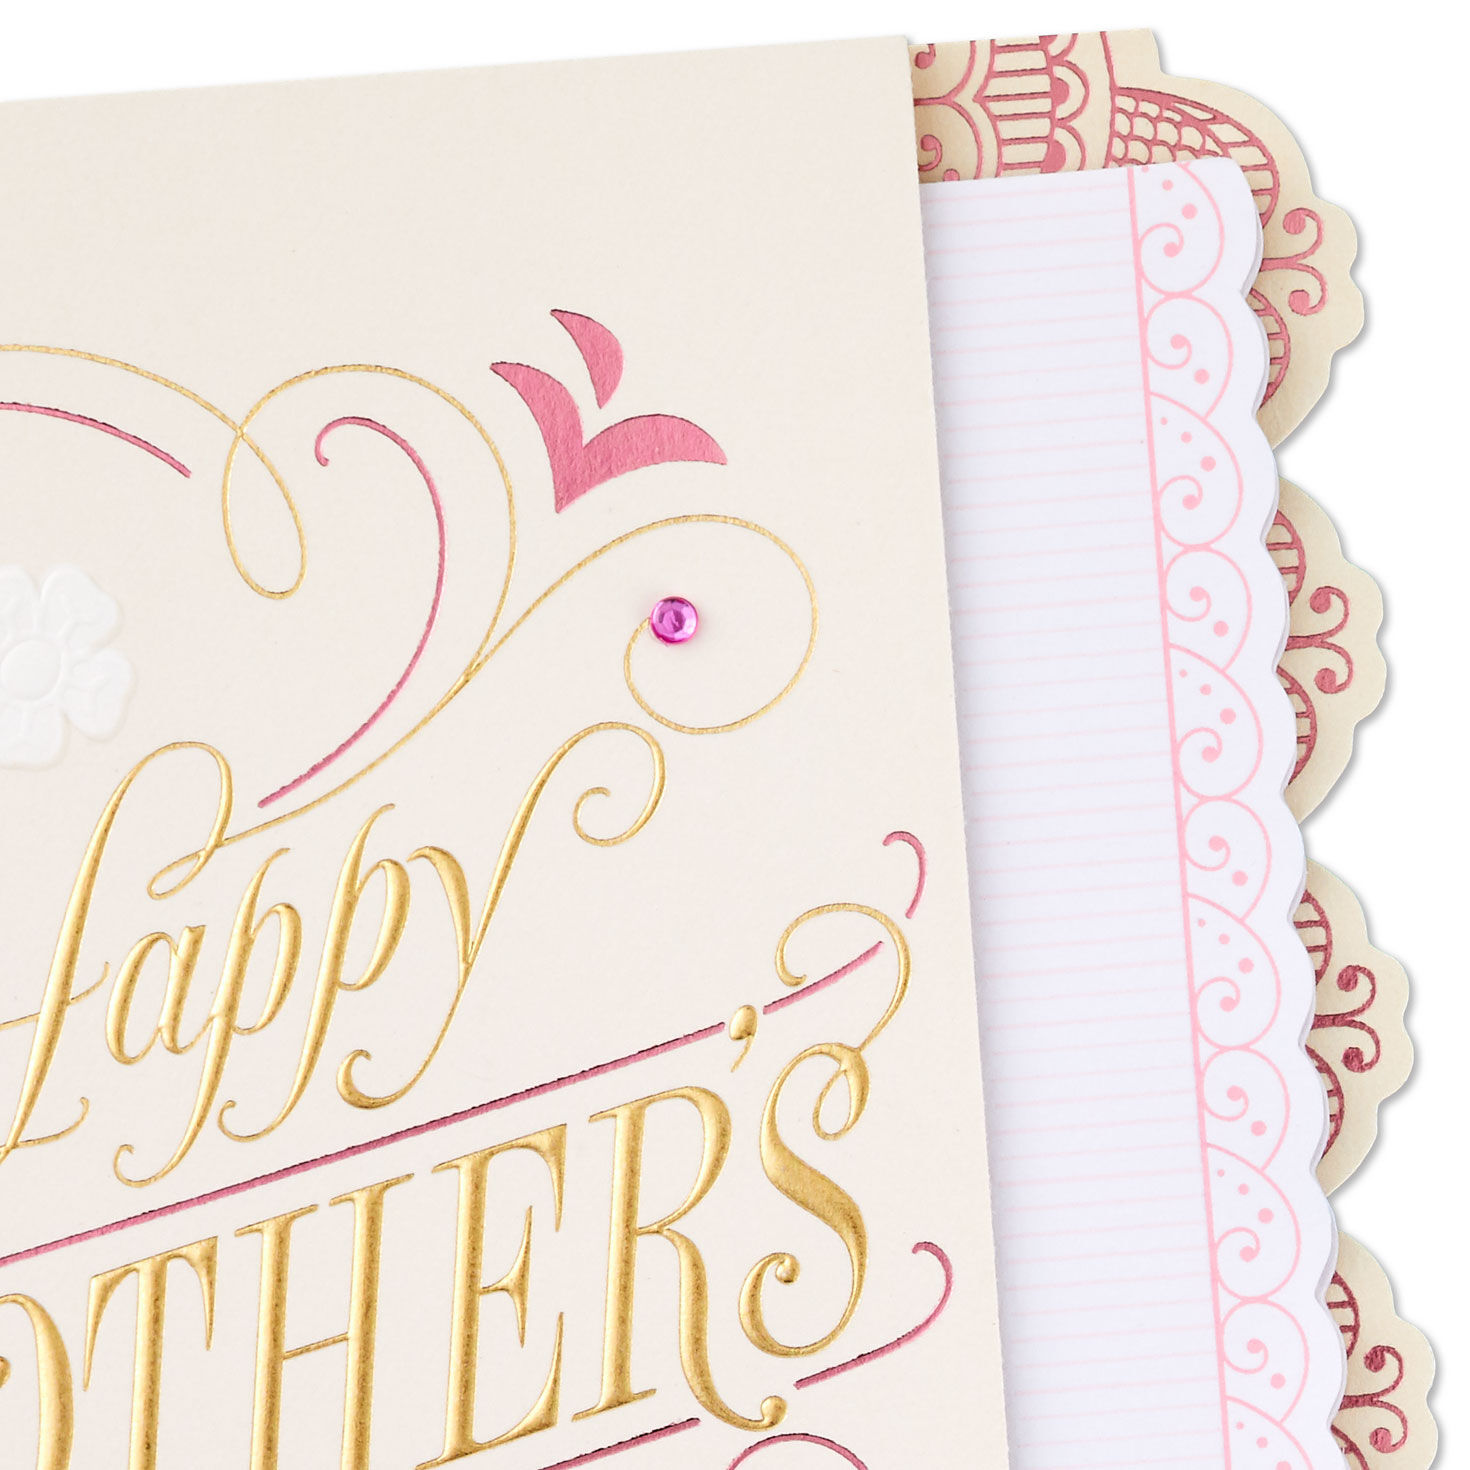 The World Needs More Moms Like You Mother's Day Card for only USD 6.99 | Hallmark